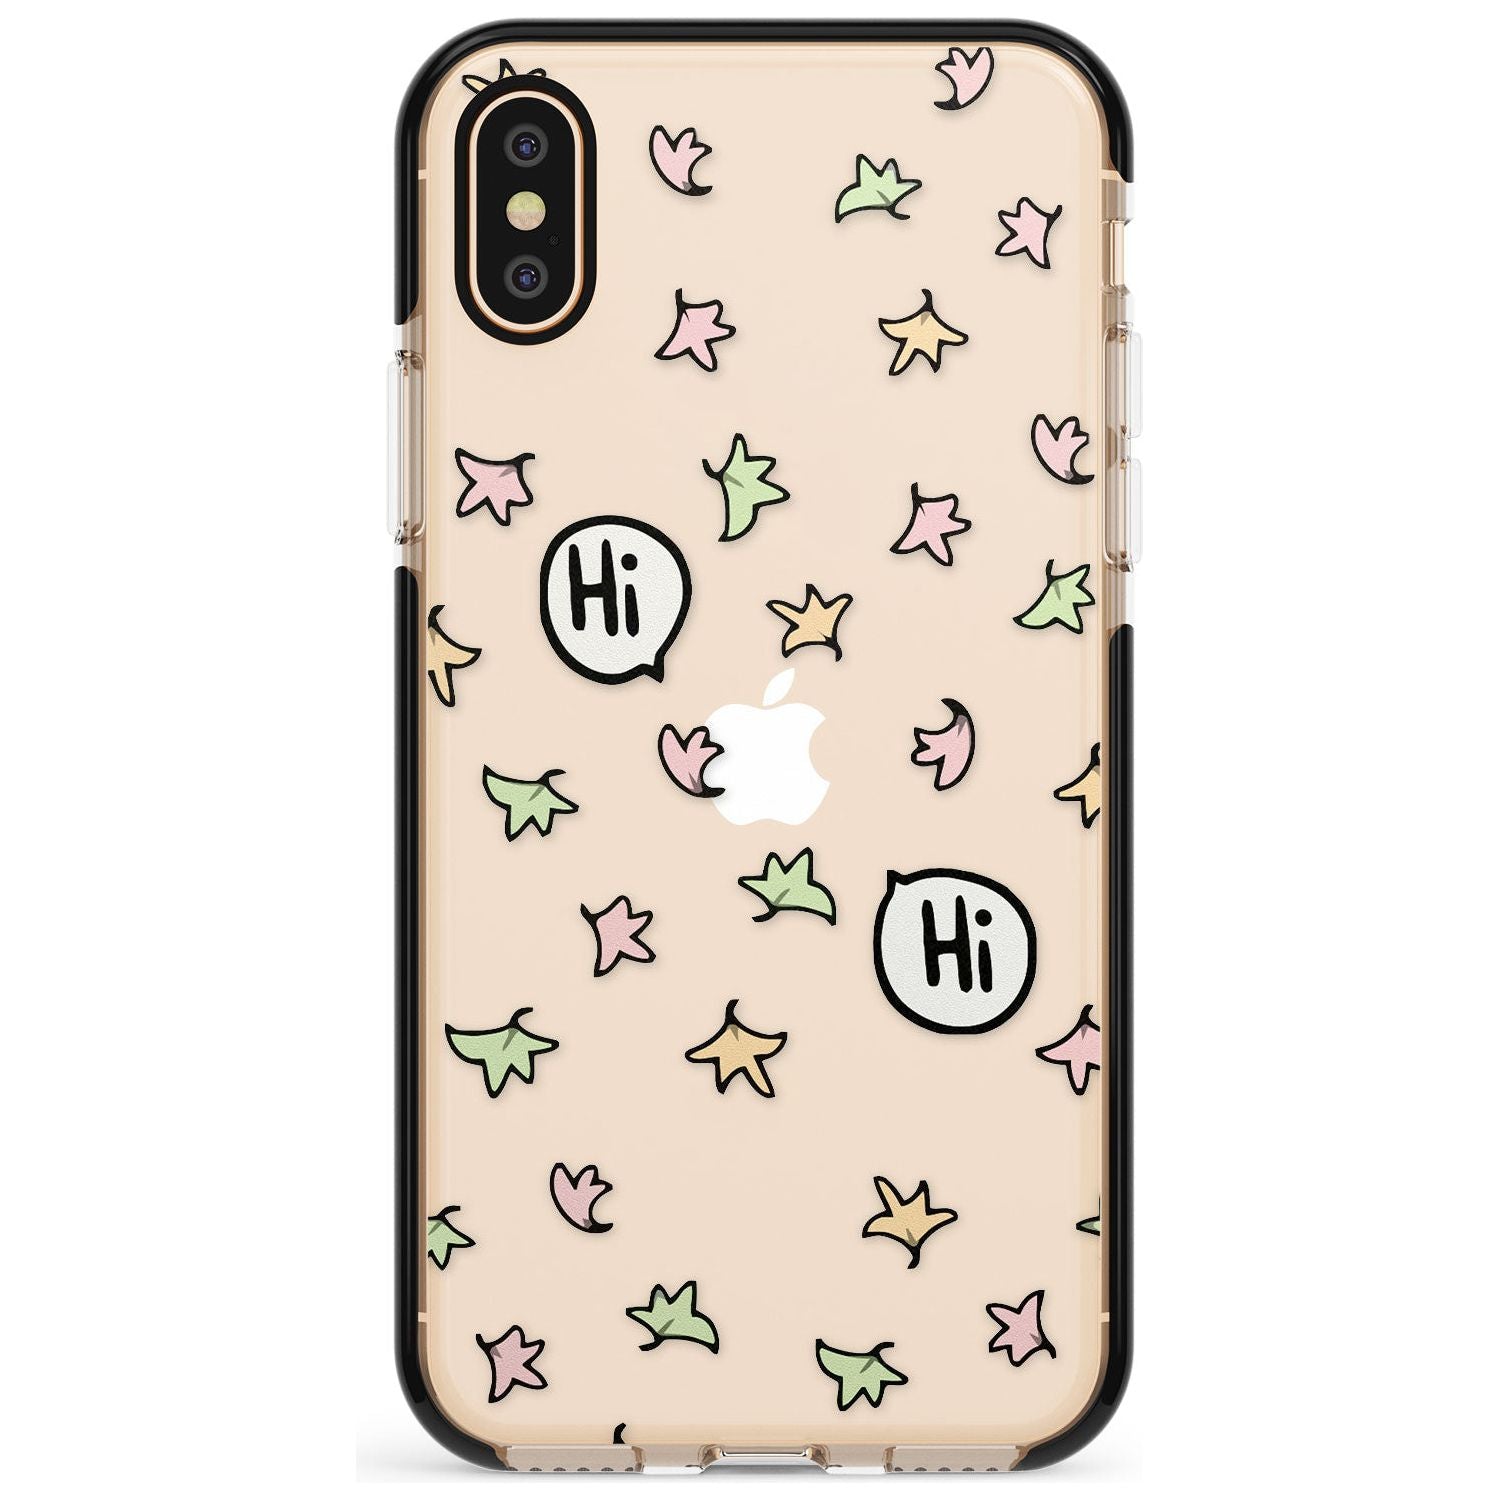 Heartstopper Leaves Pattern Black Impact Phone Case for iPhone X XS Max XR